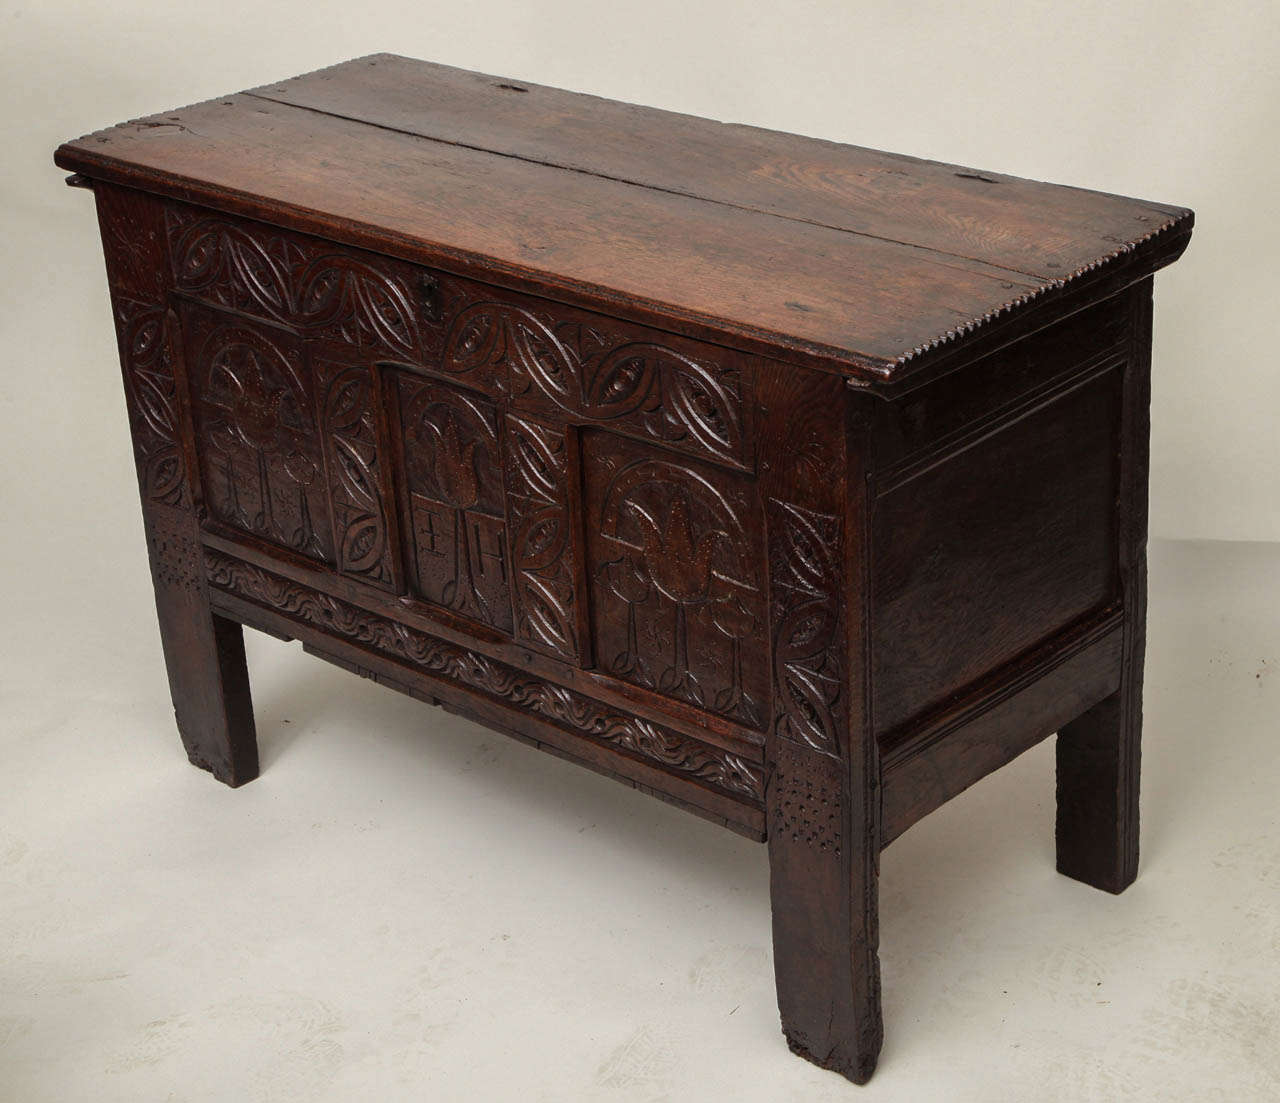 Fine early 17th Century English oak coffer, probably Dorset, circa 1630, the two plank lid with molded edge and original wire hinges, the paneled front with lunette carved stiles and rails, the three panels with arcaded tulips, the center with the